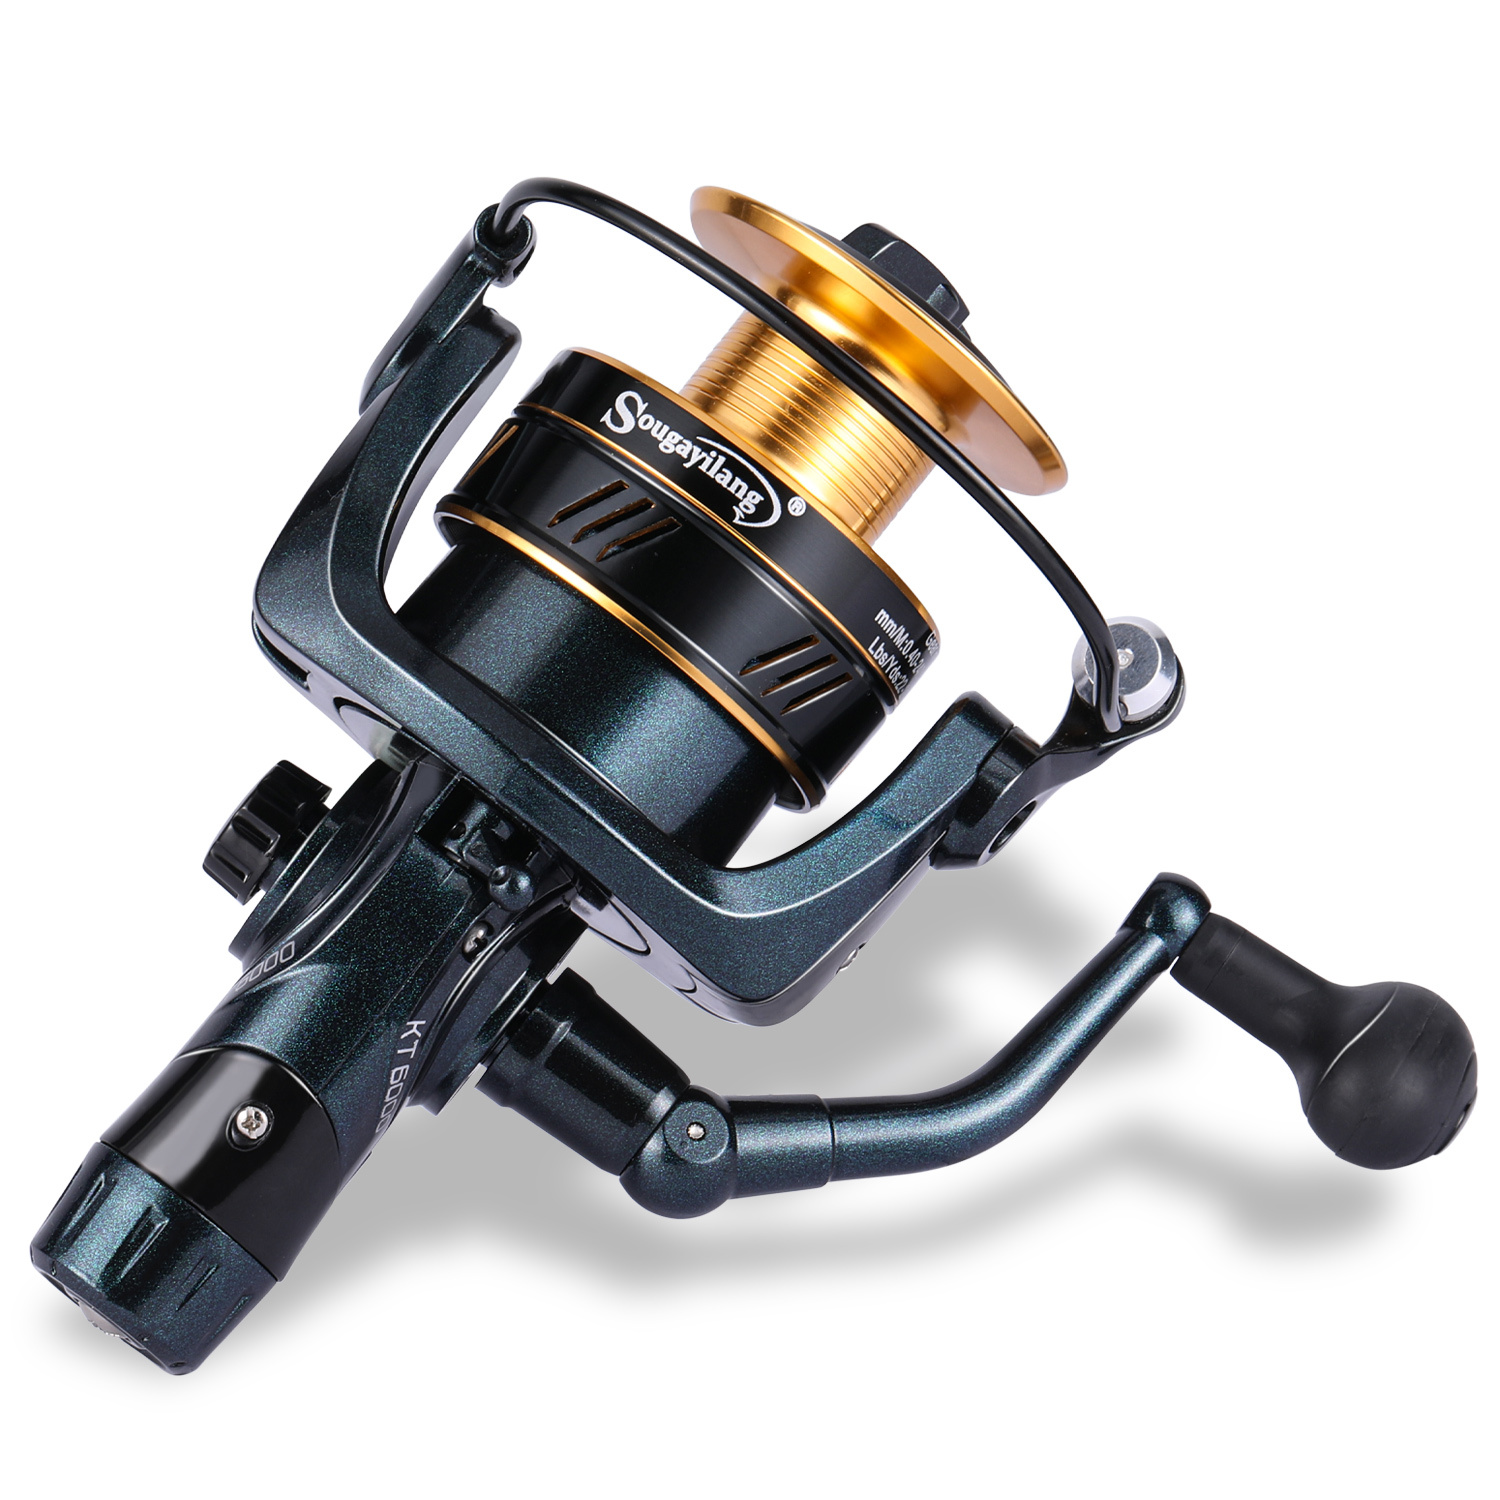 Fishing Reel Spinner Spinning Reel -Fresh and Saltwater Fishing Reel -7+1  Stainless Steel Ball Bearings -Up to 22 Lbs Carbon Fiber Drag - Oversized